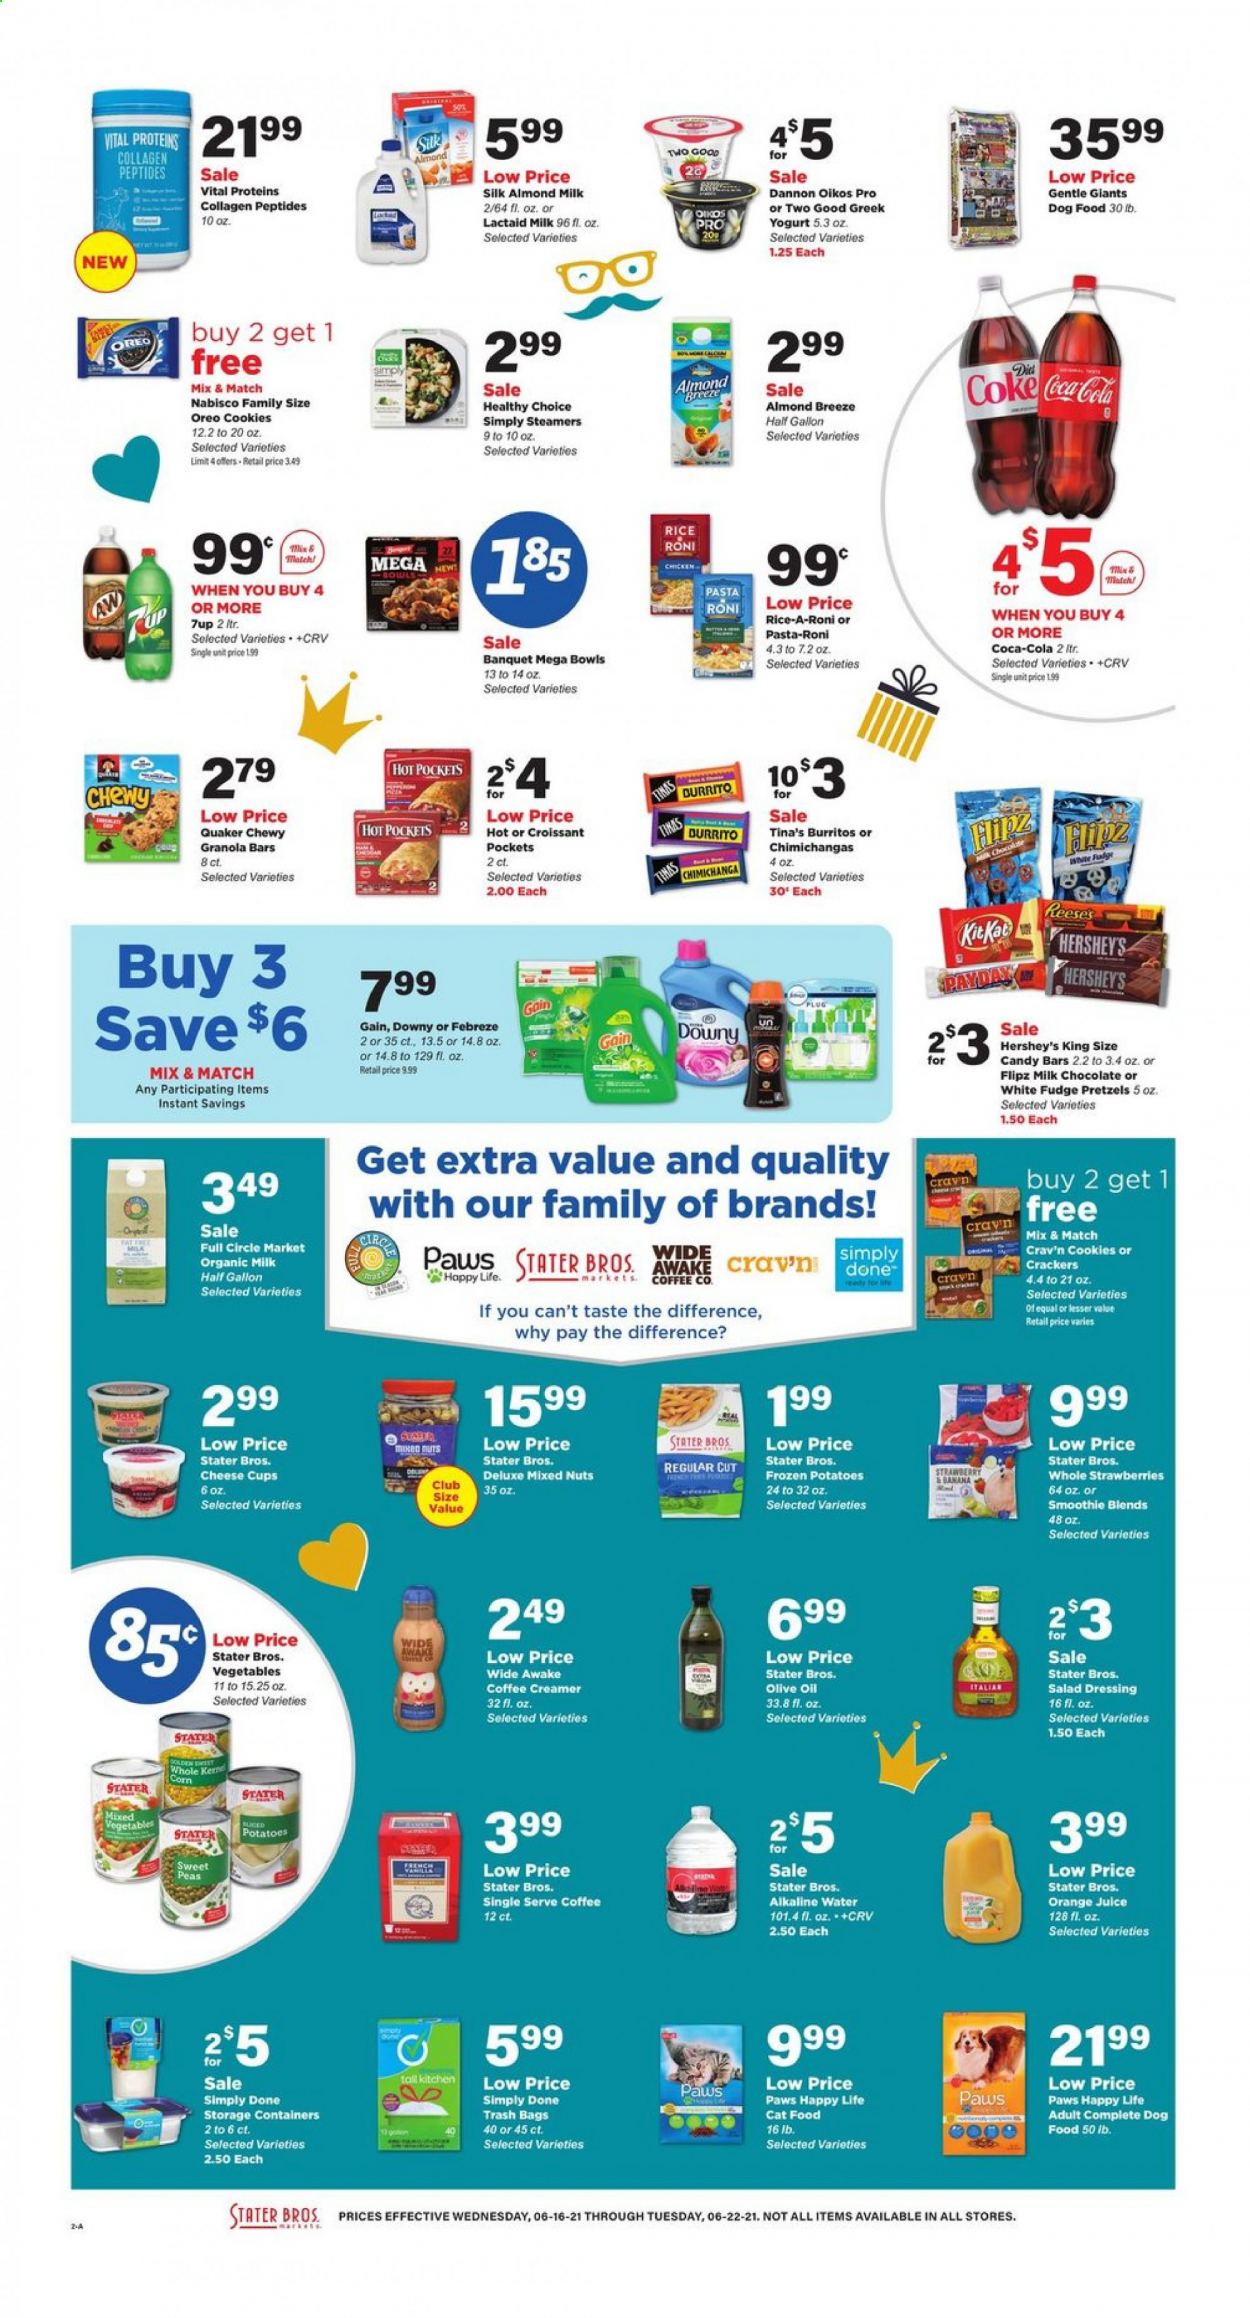 thumbnail - Stater Bros. Flyer - 06/16/2021 - 06/22/2021 - Sales products - pretzels, croissant, corn, peas, strawberries, hot pocket, burrito, Quaker, Healthy Choice, Lactaid, cheese cup, greek yoghurt, Oreo, yoghurt, Oikos, Dannon, almond milk, organic milk, Almond Breeze, creamer, Reese's, Hershey's, mixed vegetables, cookies, fudge, milk chocolate, chocolate, crackers, granola bar, rice, salad dressing, dressing, olive oil, oil, mixed nuts, Coca-Cola, orange juice, juice, 7UP, smoothie, alkaline water, Febreze, Gain, trash bags, cup, storage box, Paws, animal food, cat food, dog food, Vital Proteins. Page 2.